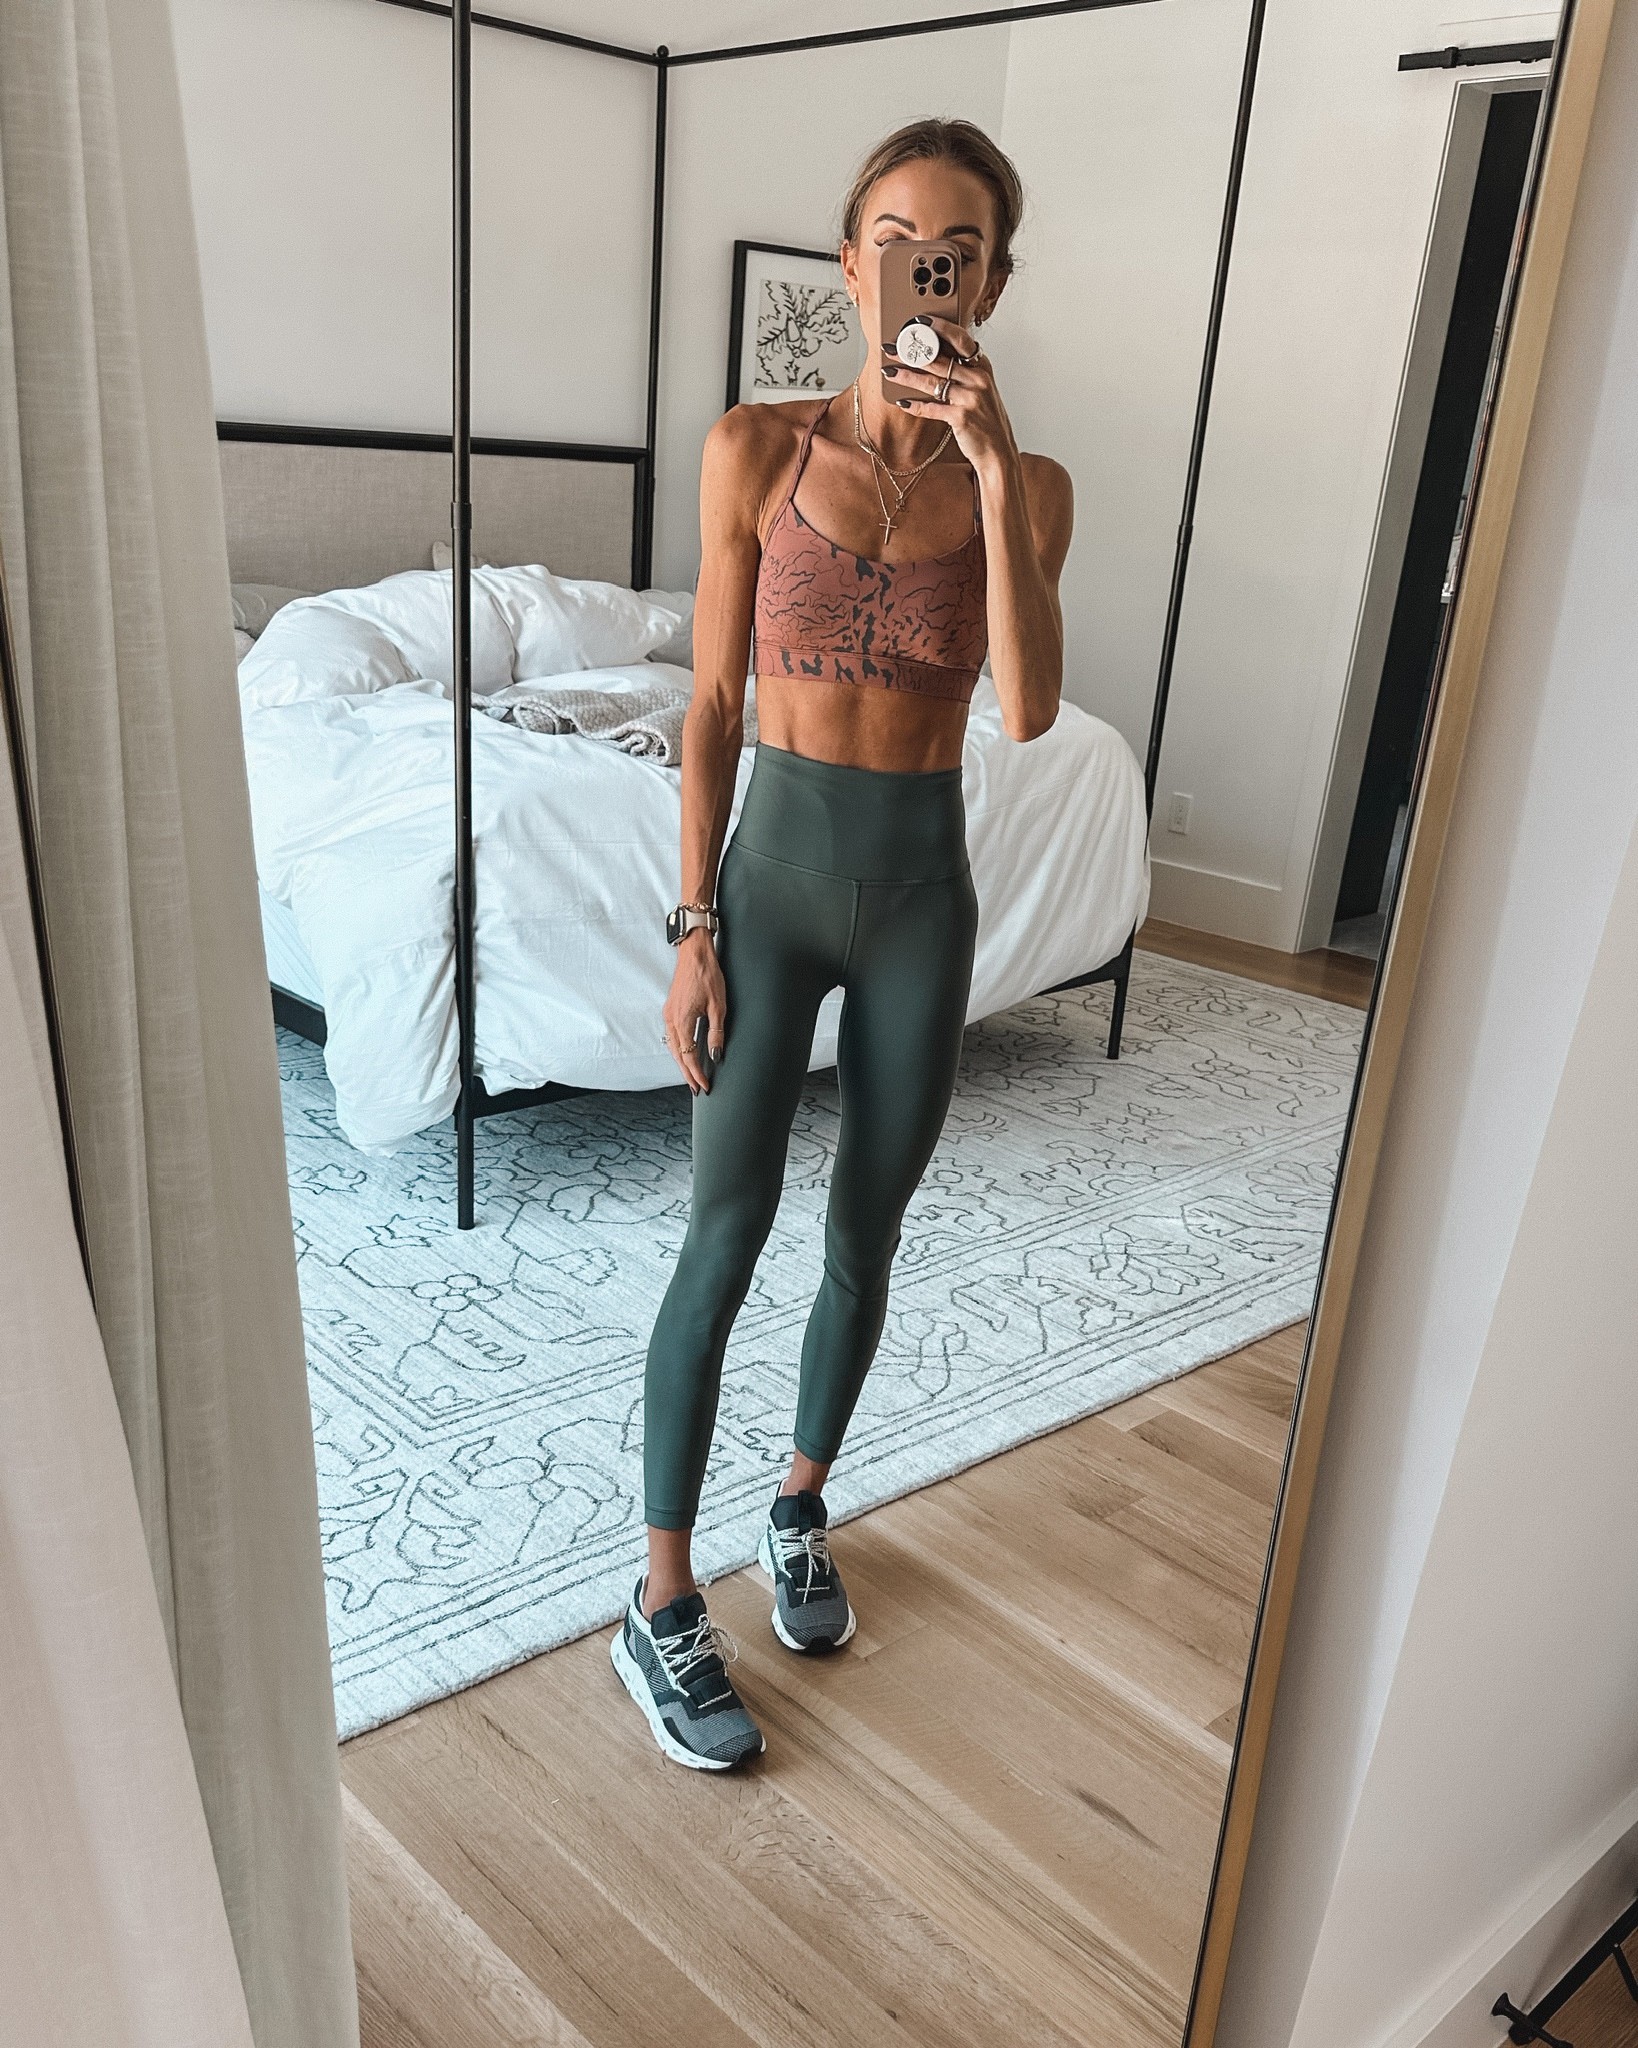 Lulu needs to bring this style of bra back! Wild Twist Bra In Dusty Dawn  (6). Having fun revisiting old favorites with.ahemmy new enhancements  :) : r/lululemon